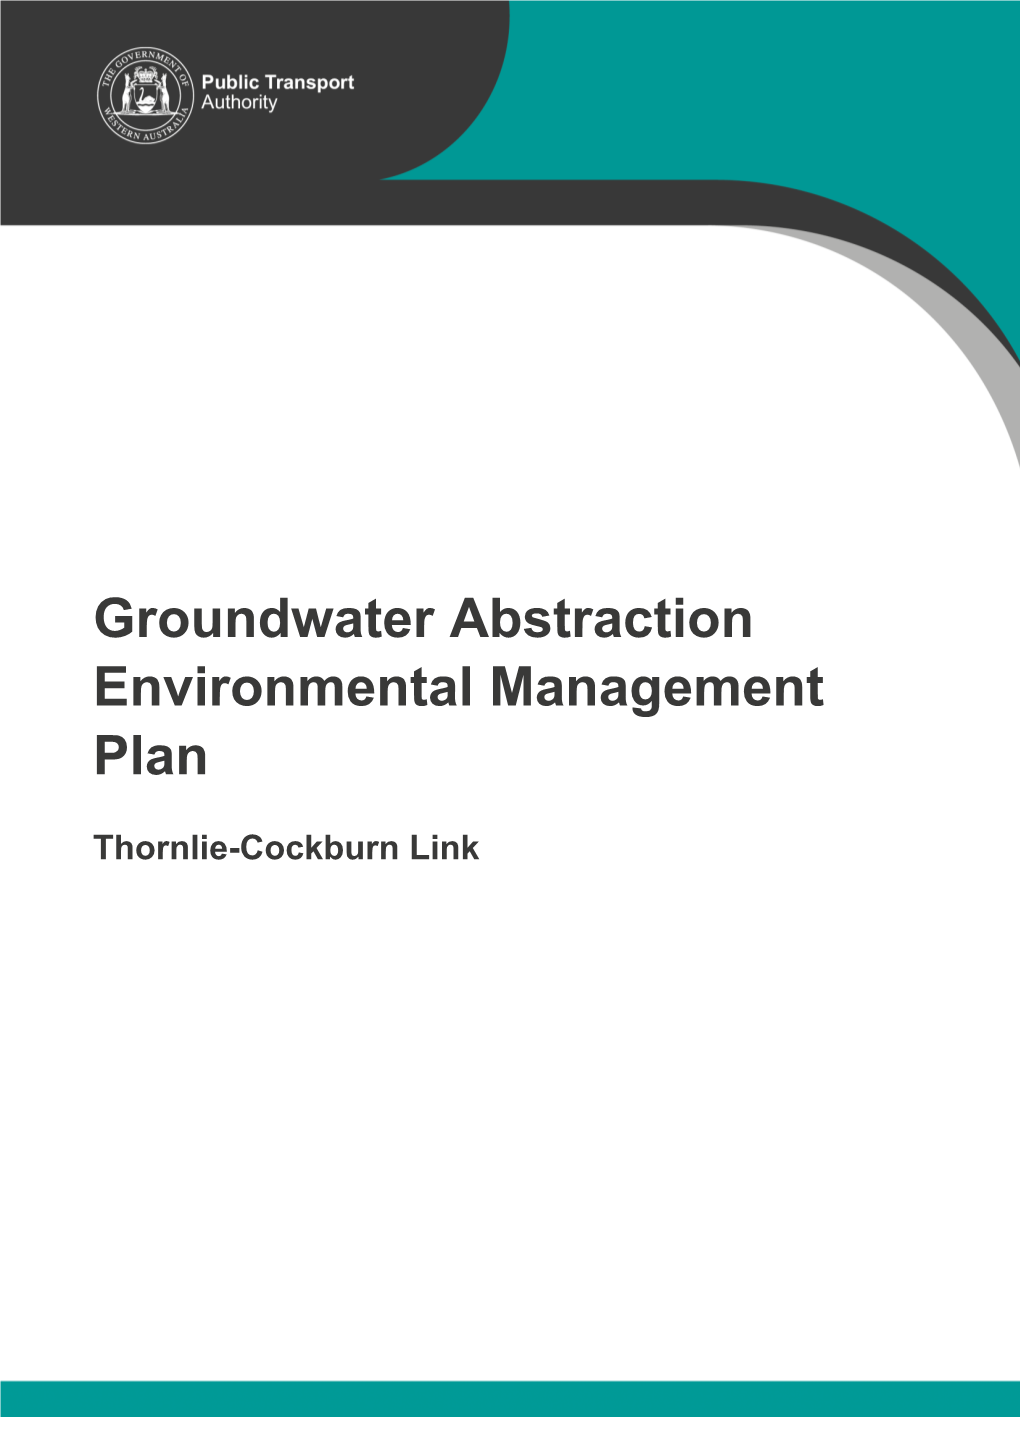 Groundwater Abstraction Environmental Management Plan